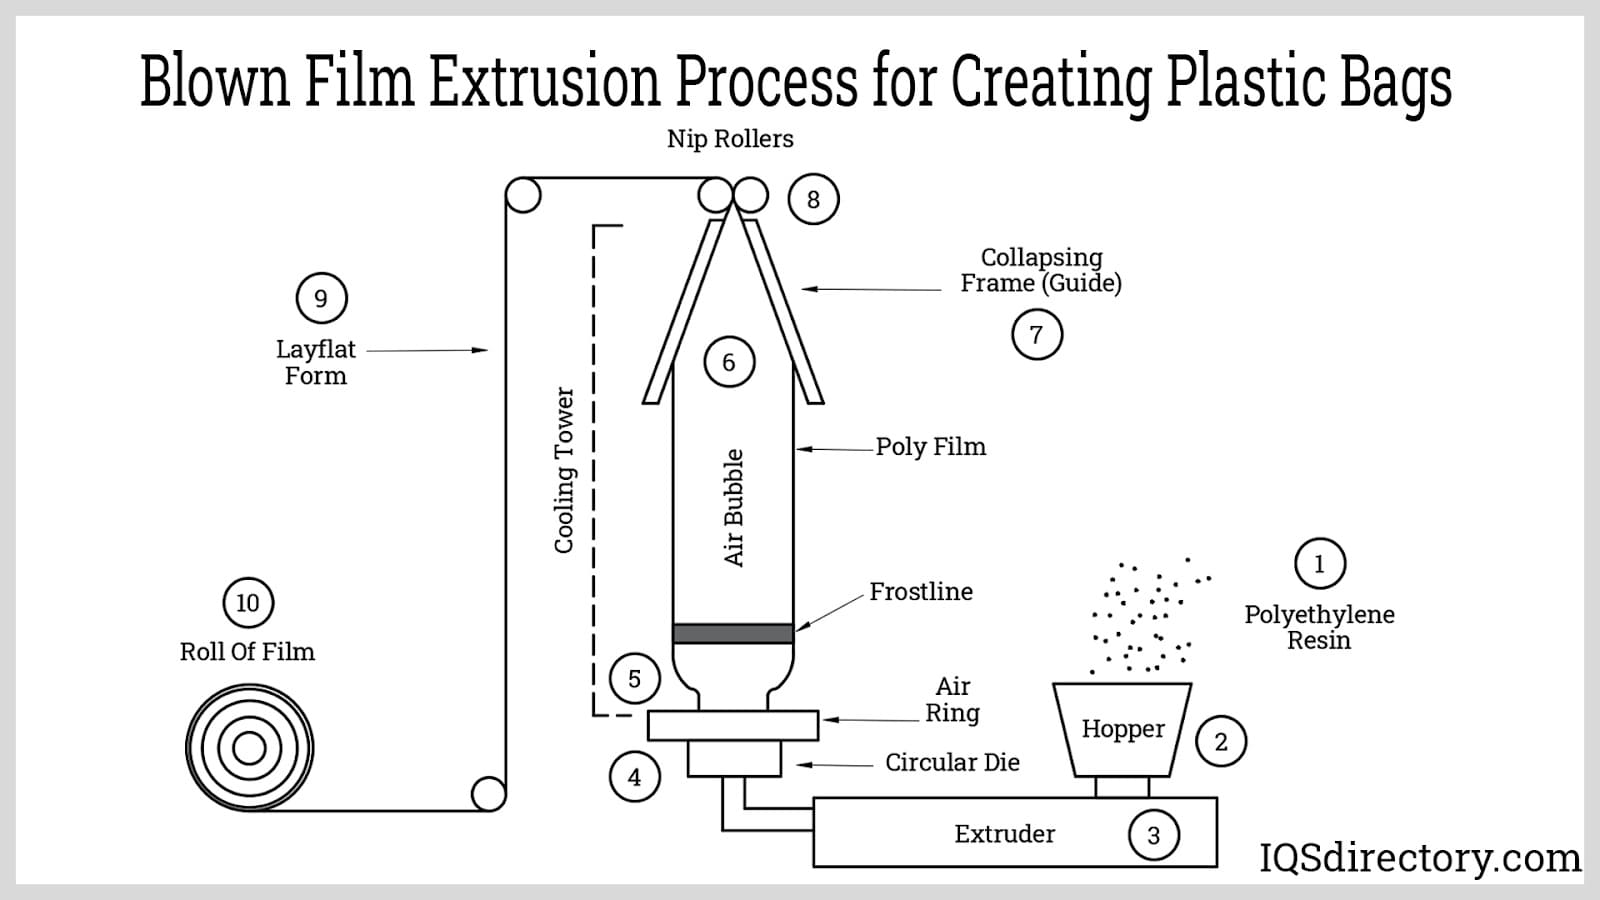 Blown Film Extrusion Process for Creating Plastic Bags